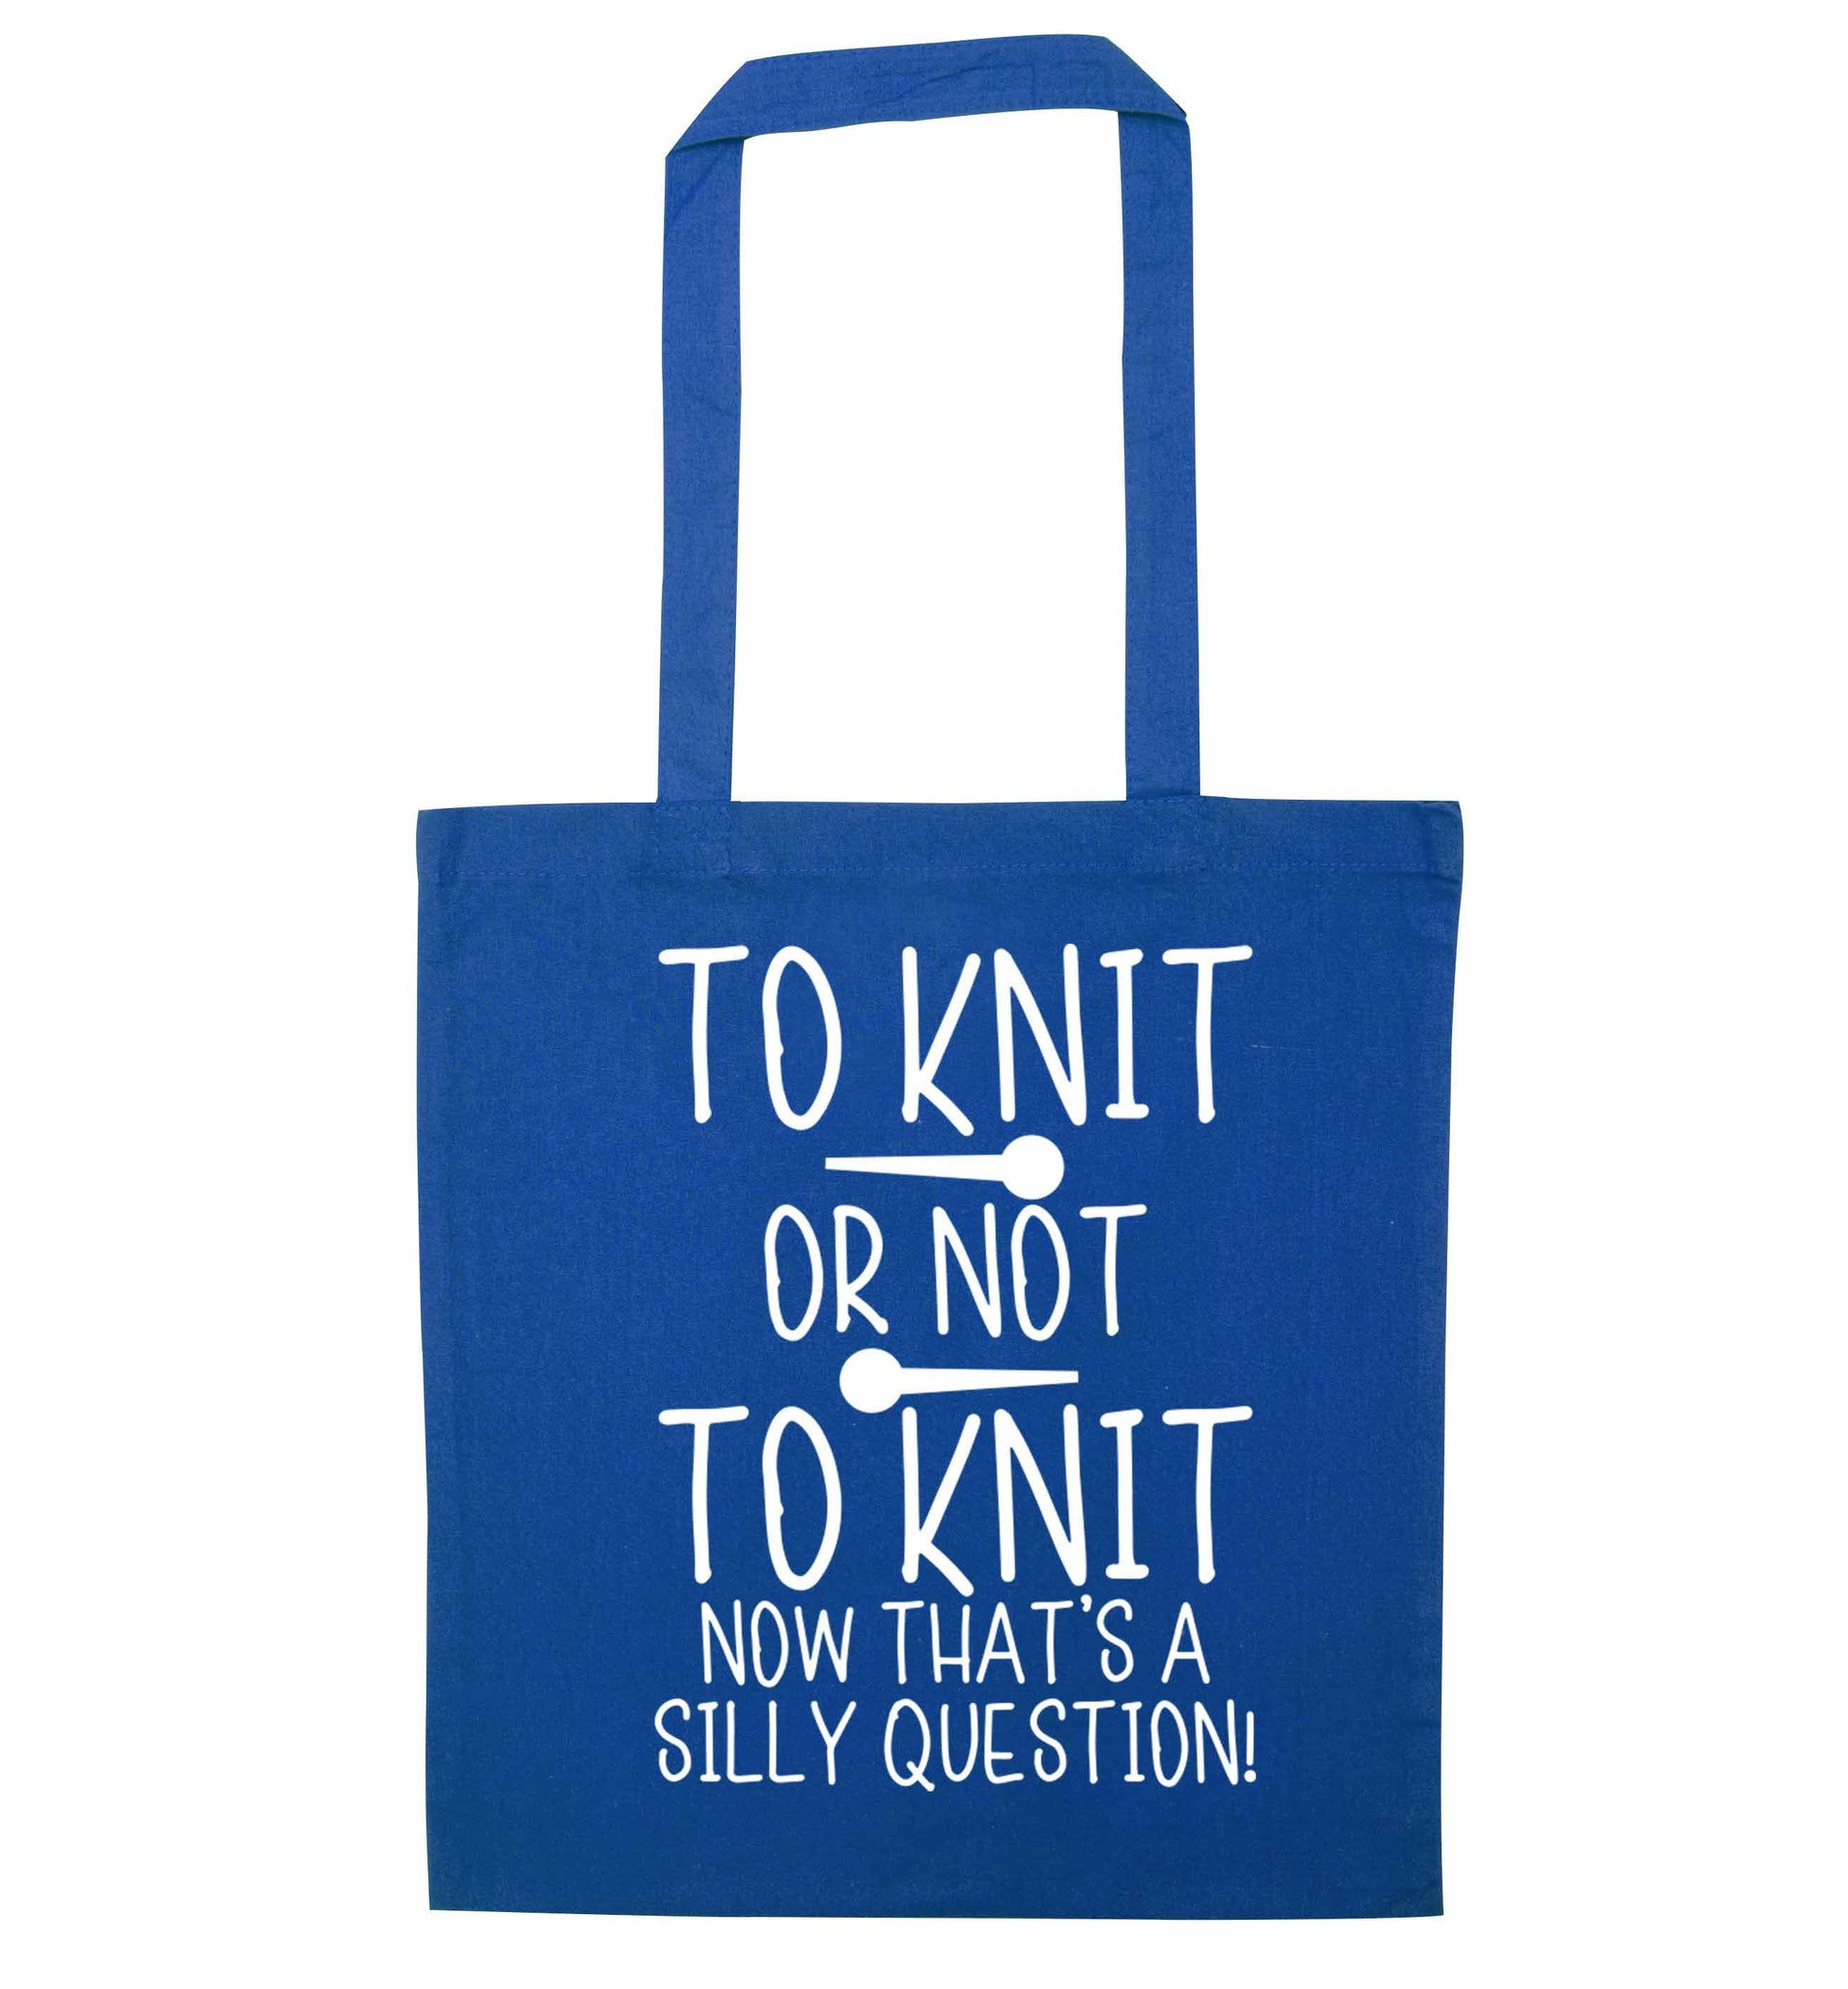 To knit or not to knit now that's a silly question blue tote bag